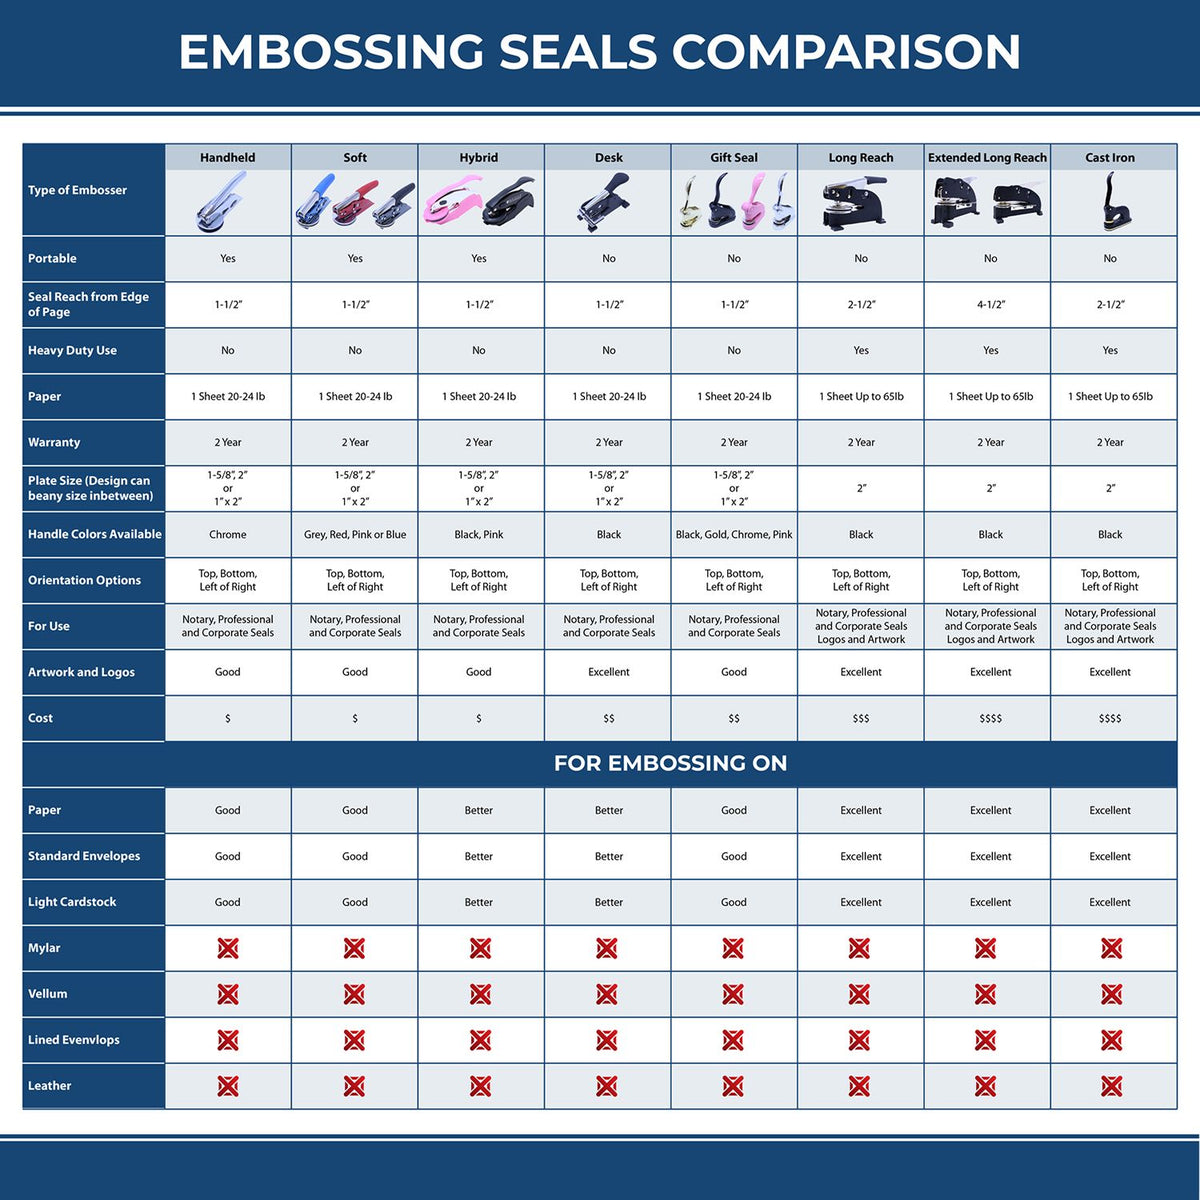 A comparison chart for the different types of mount models available for the Gift Kansas Land Surveyor Seal